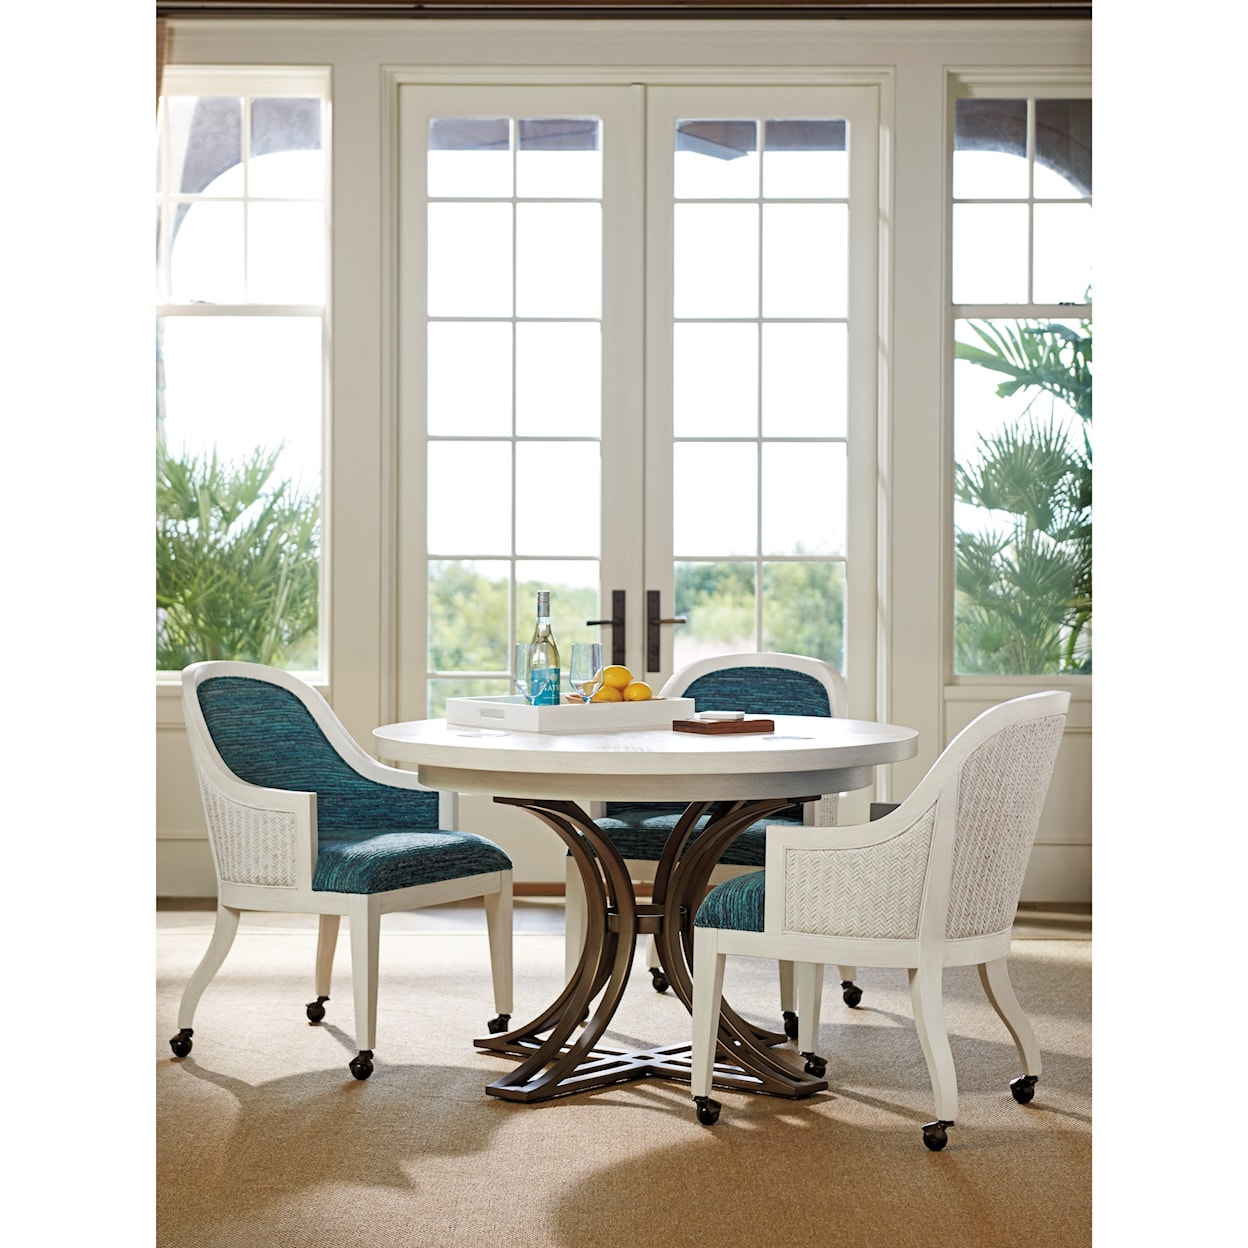 Tommy Bahama Home Ocean Breeze Marsh Creek Round Dining Table